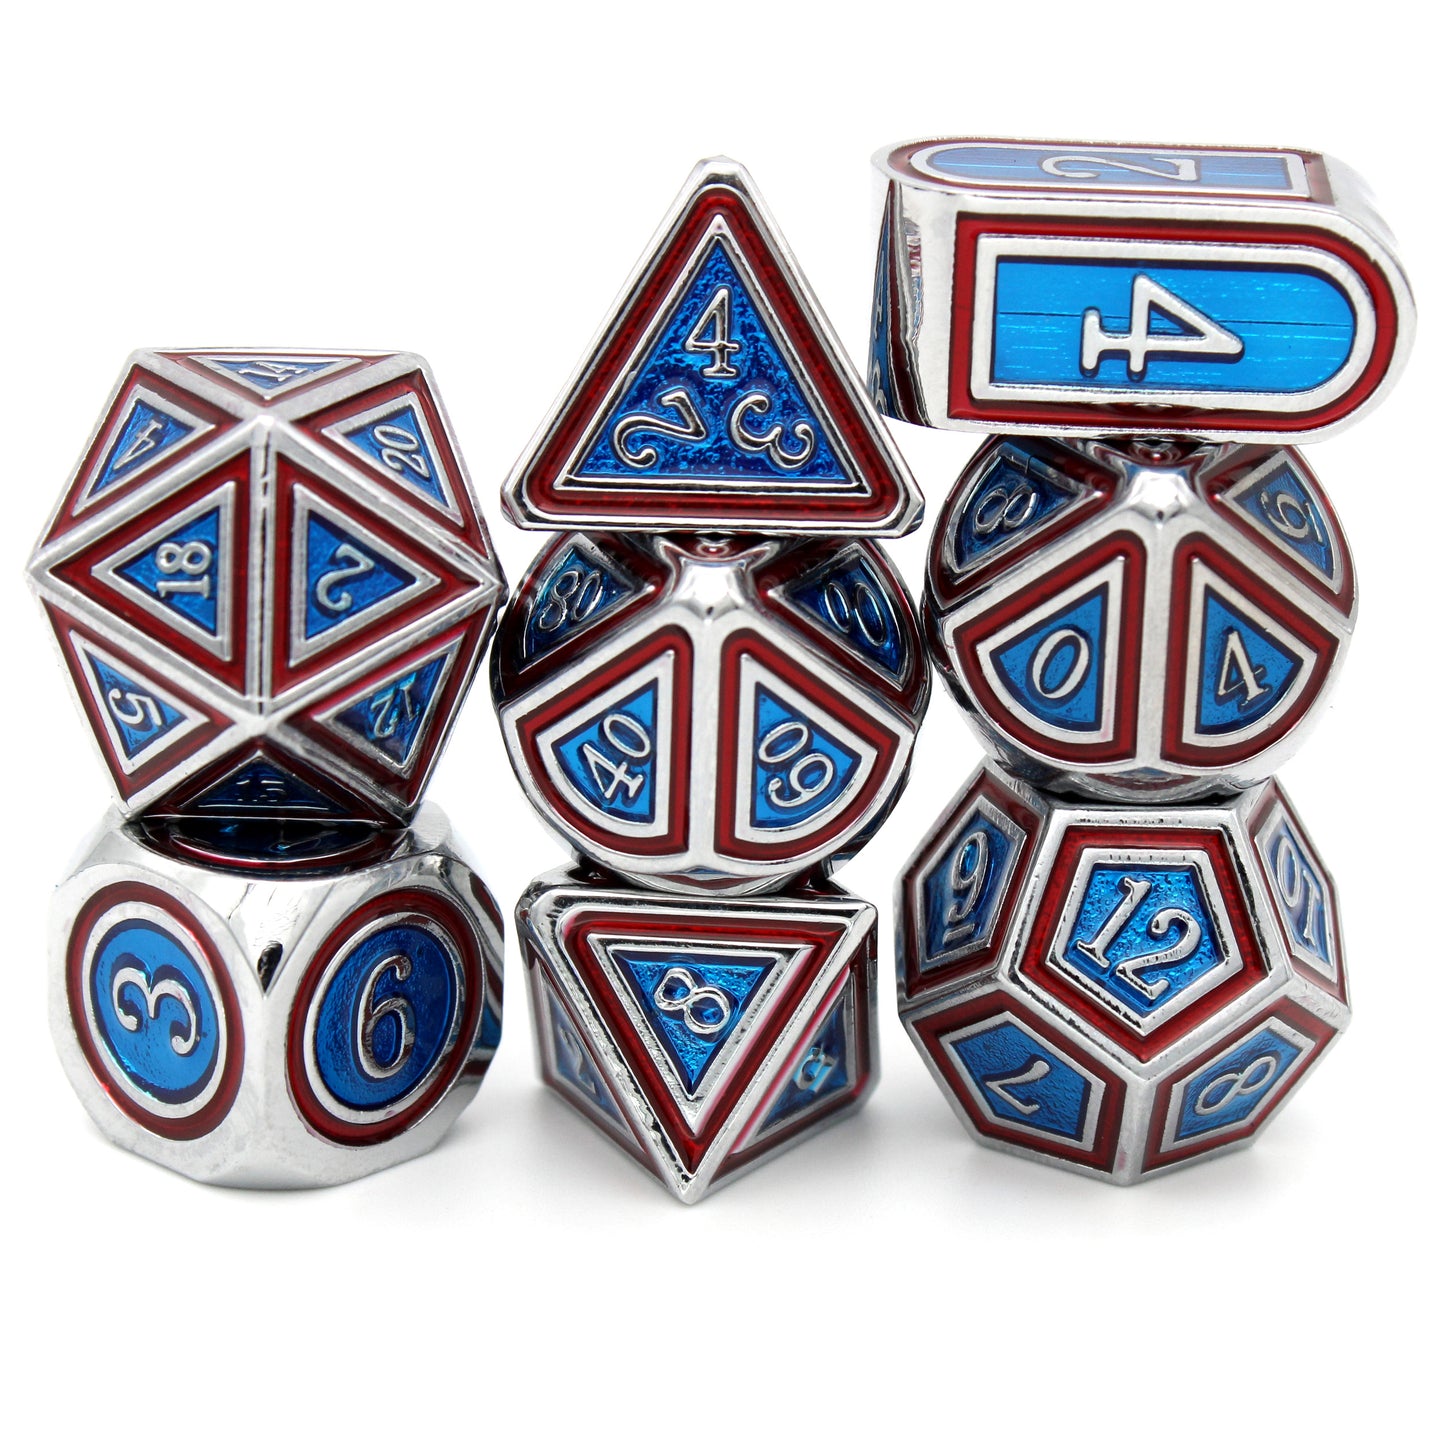 America's Ass is an 8-piece silver metal dice set with patriotic inlays of red and blue.